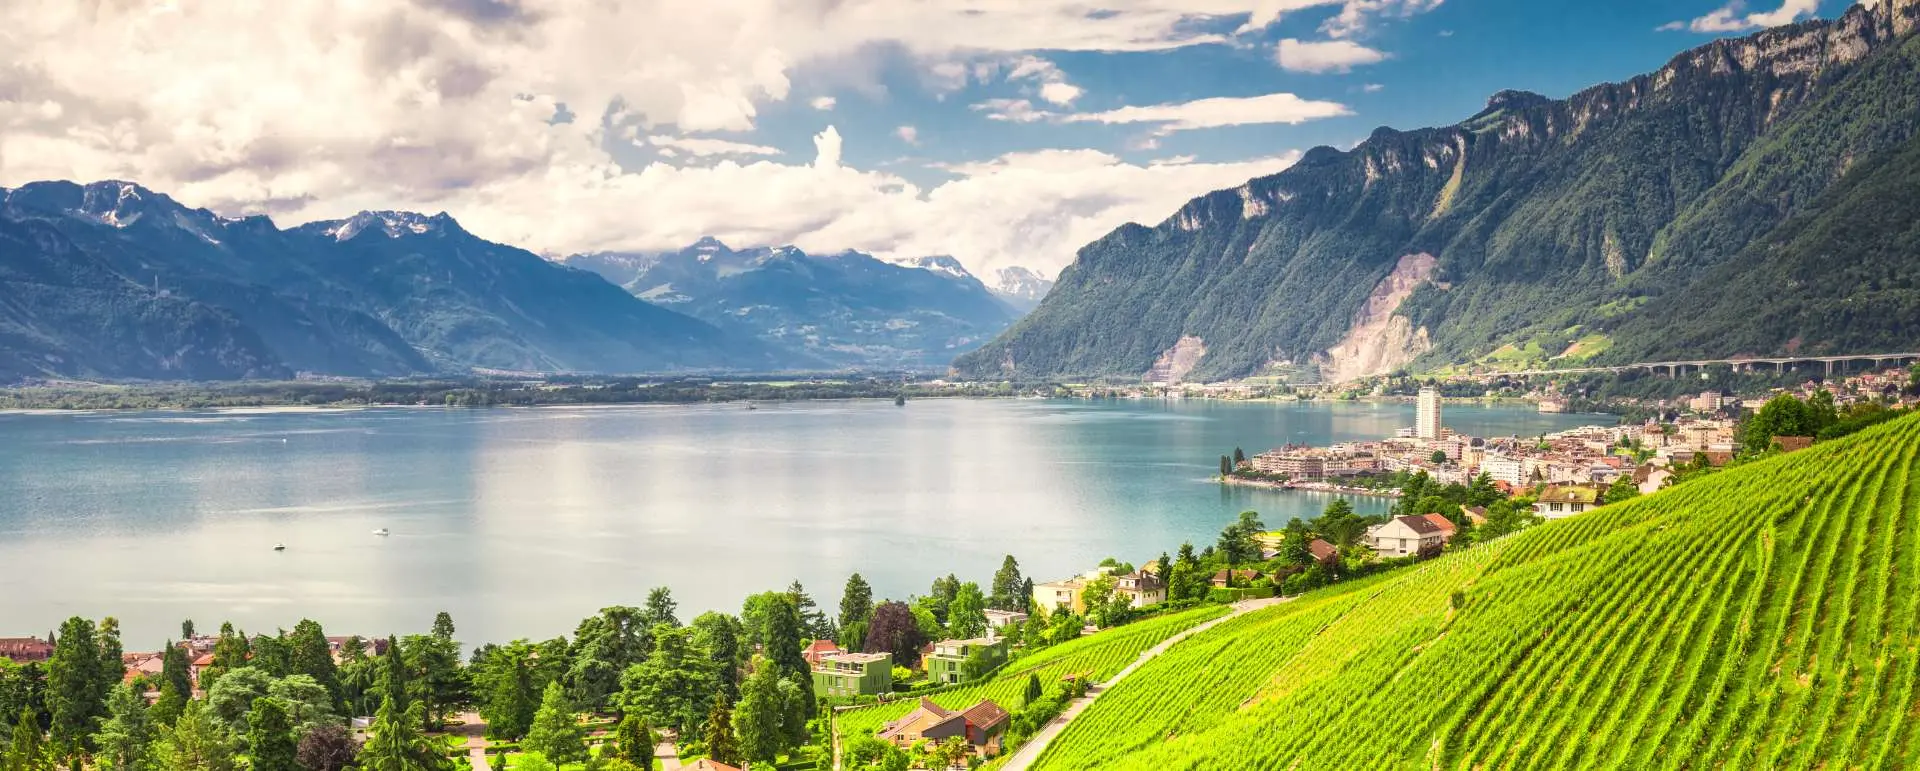 Vaud - the destination for groups